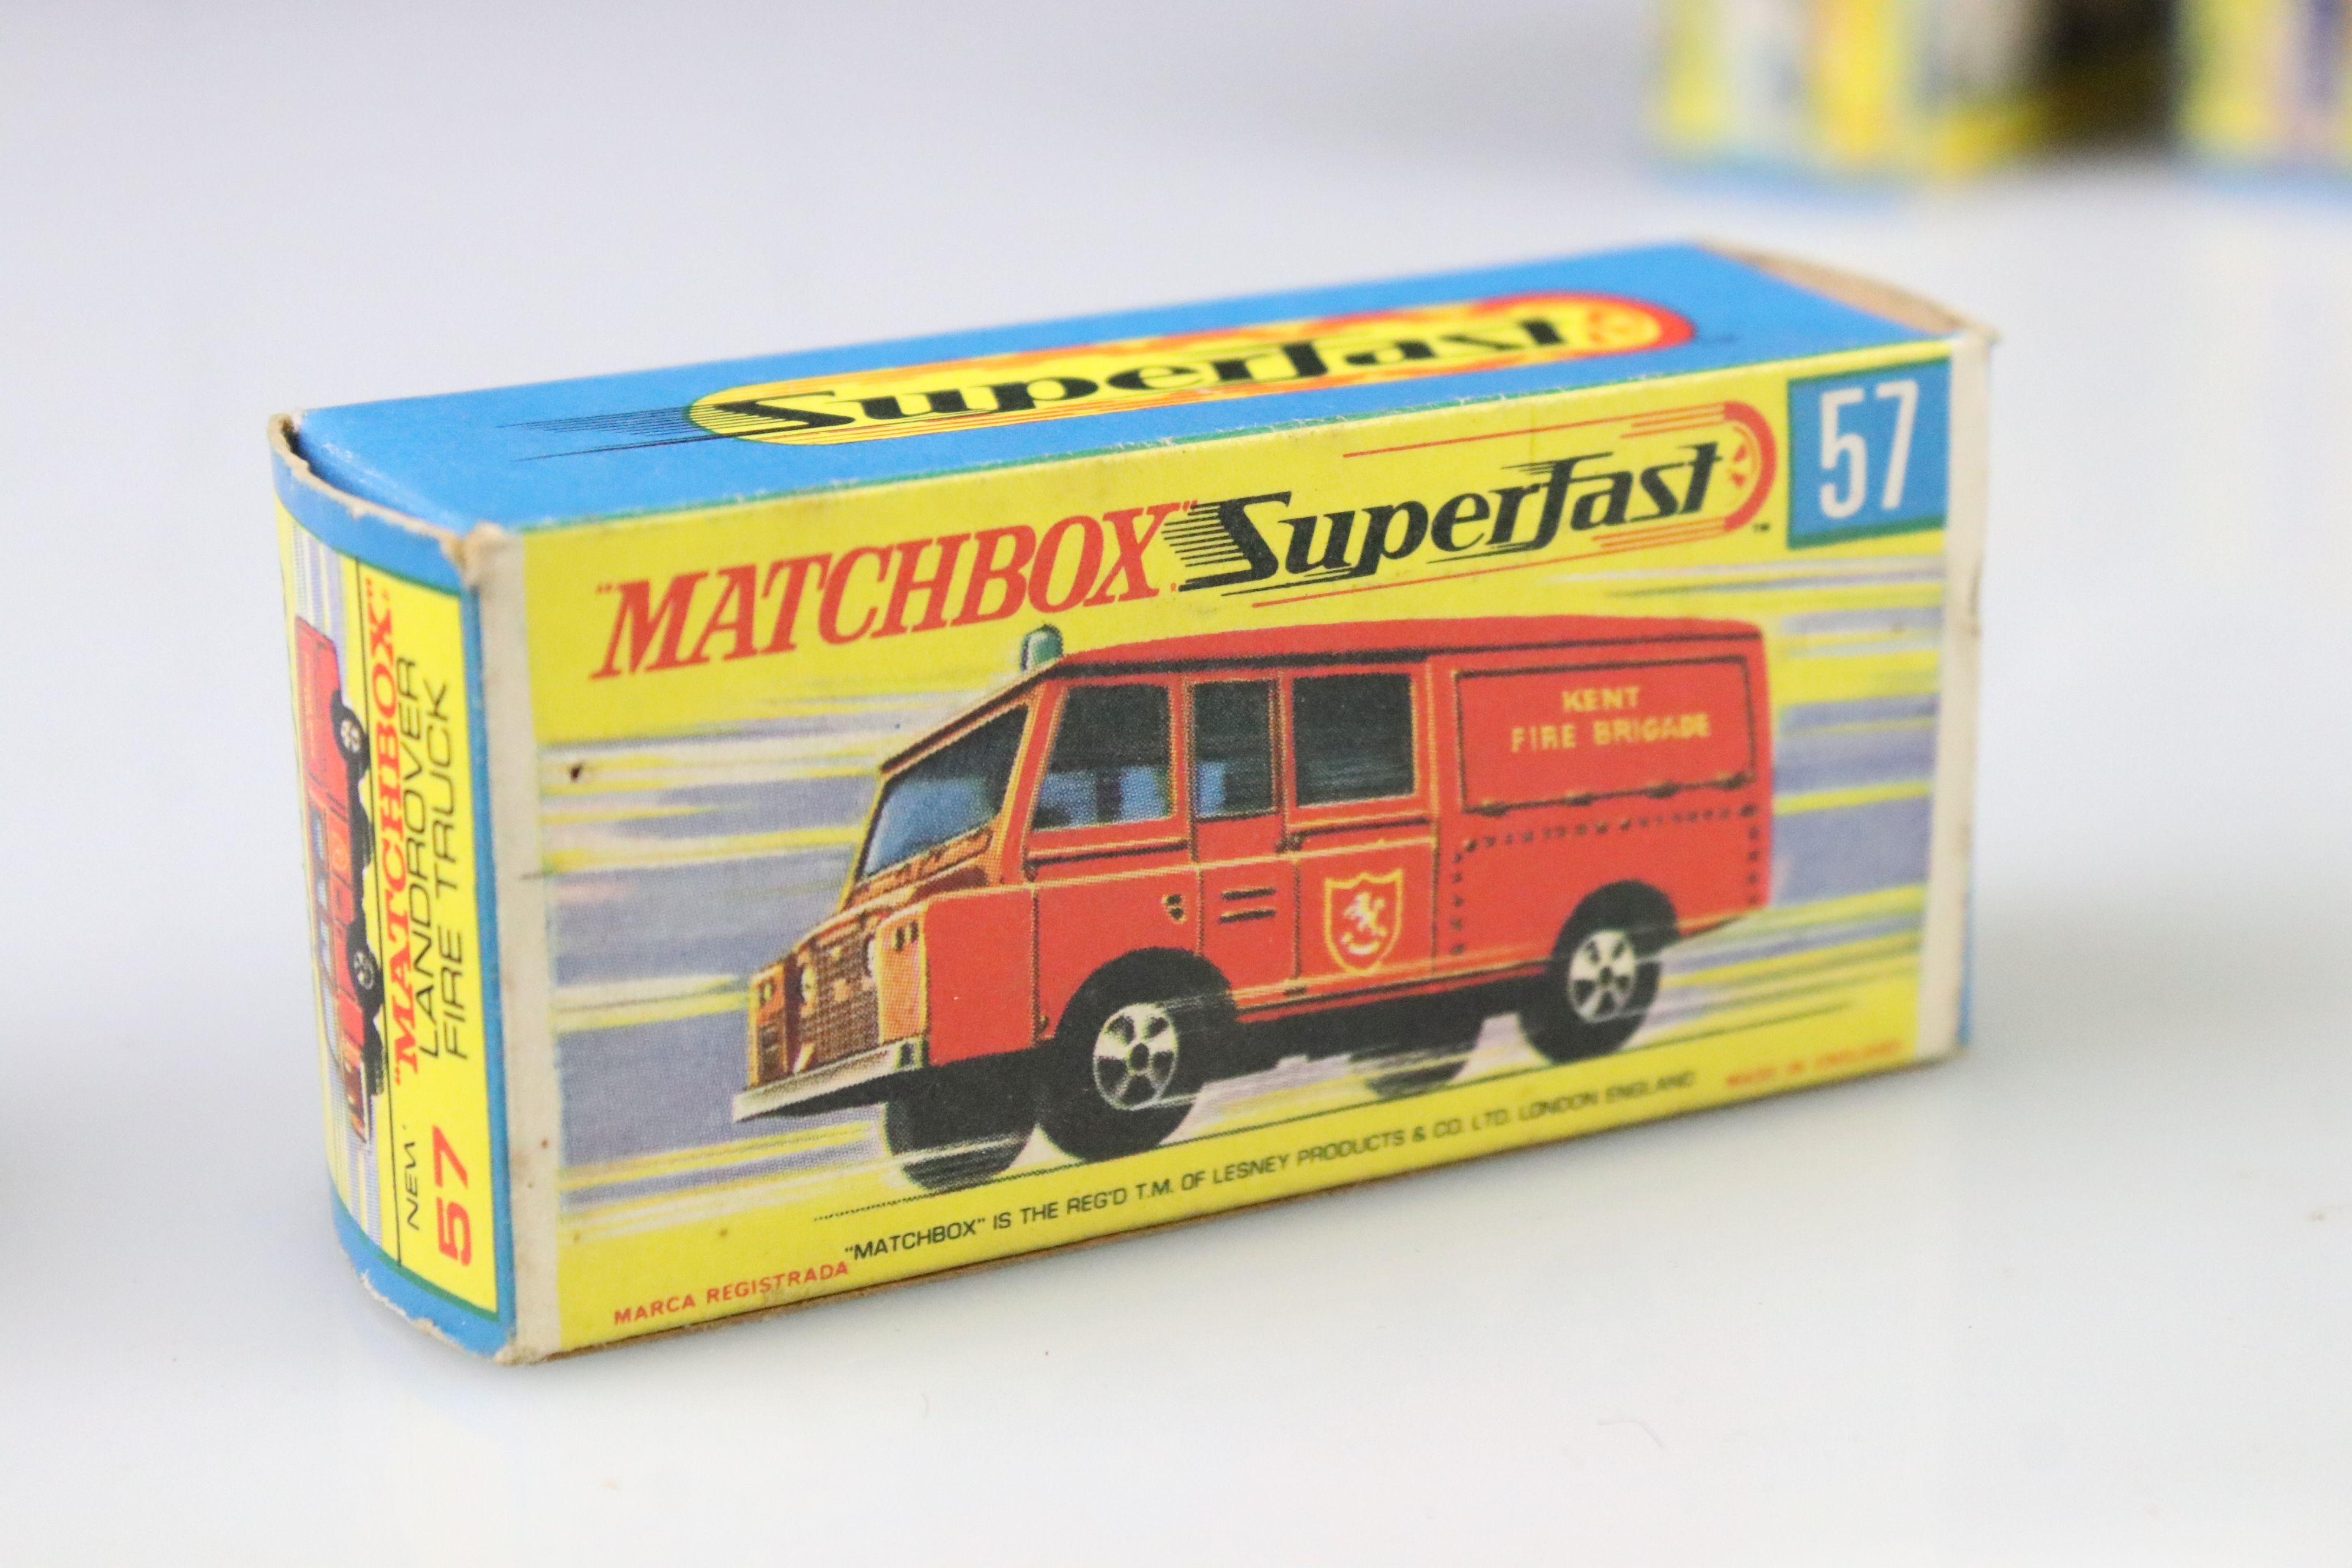 17 Boxed Matchbox Superfast diecast models to include 41 Ford GT, 29 Racing Mini, 57 Landrover - Image 47 of 53